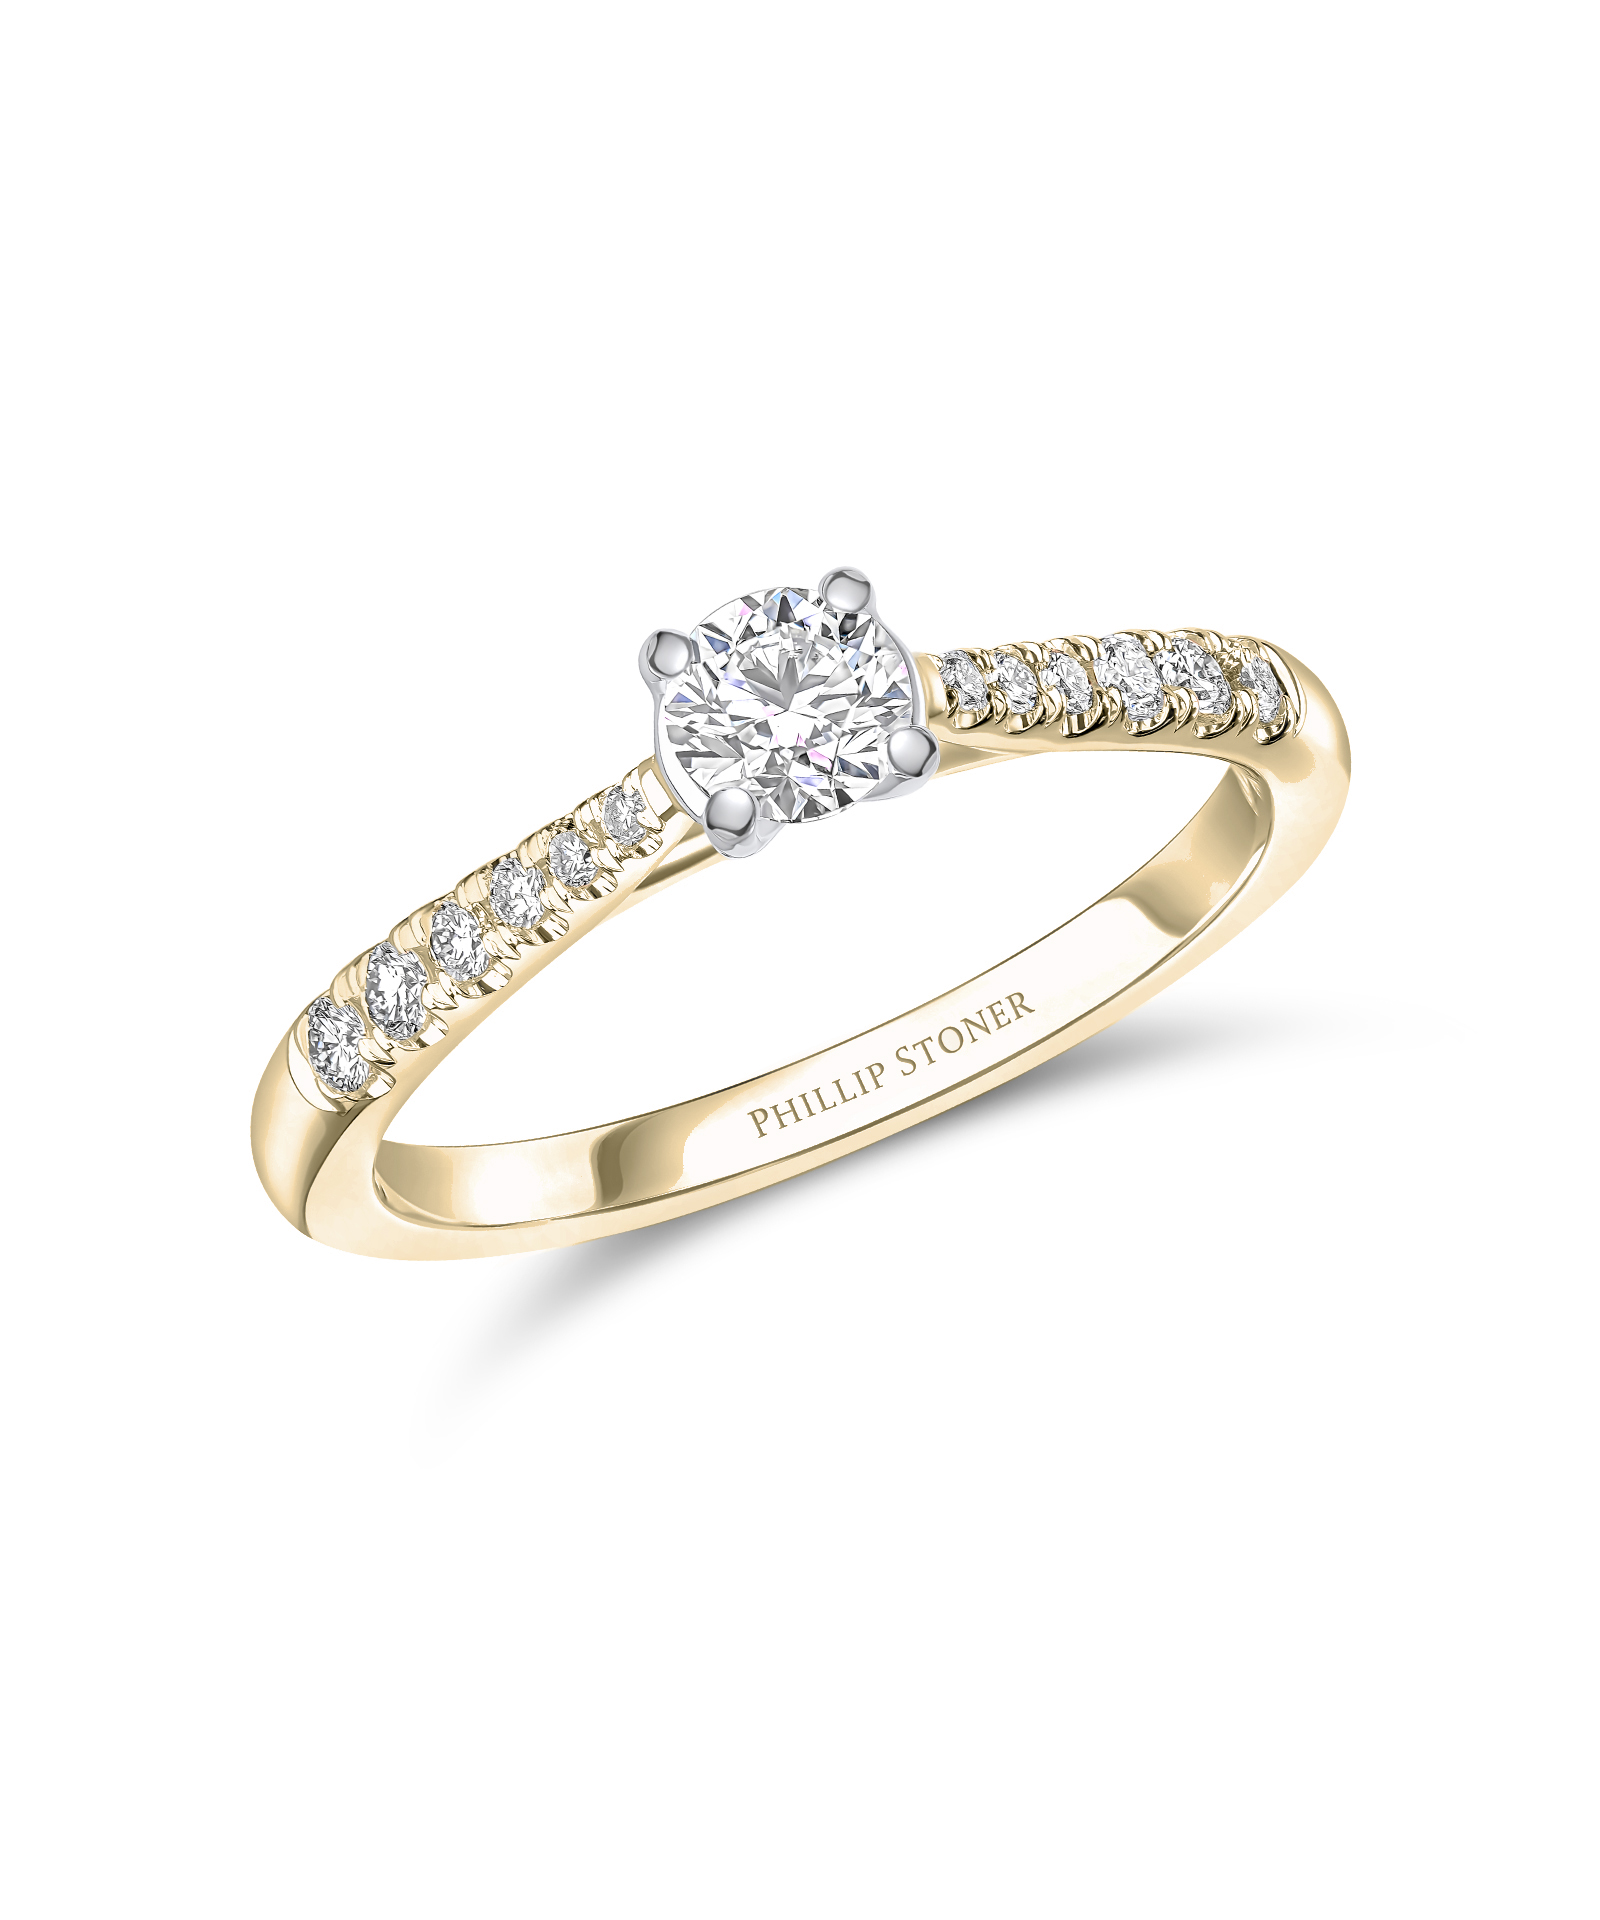 0.30ct Round Brilliant Cut Diamond Yellow Gold Engagement Ring with Scallop Set Shoulders - Phillip Stoner The Jeweller